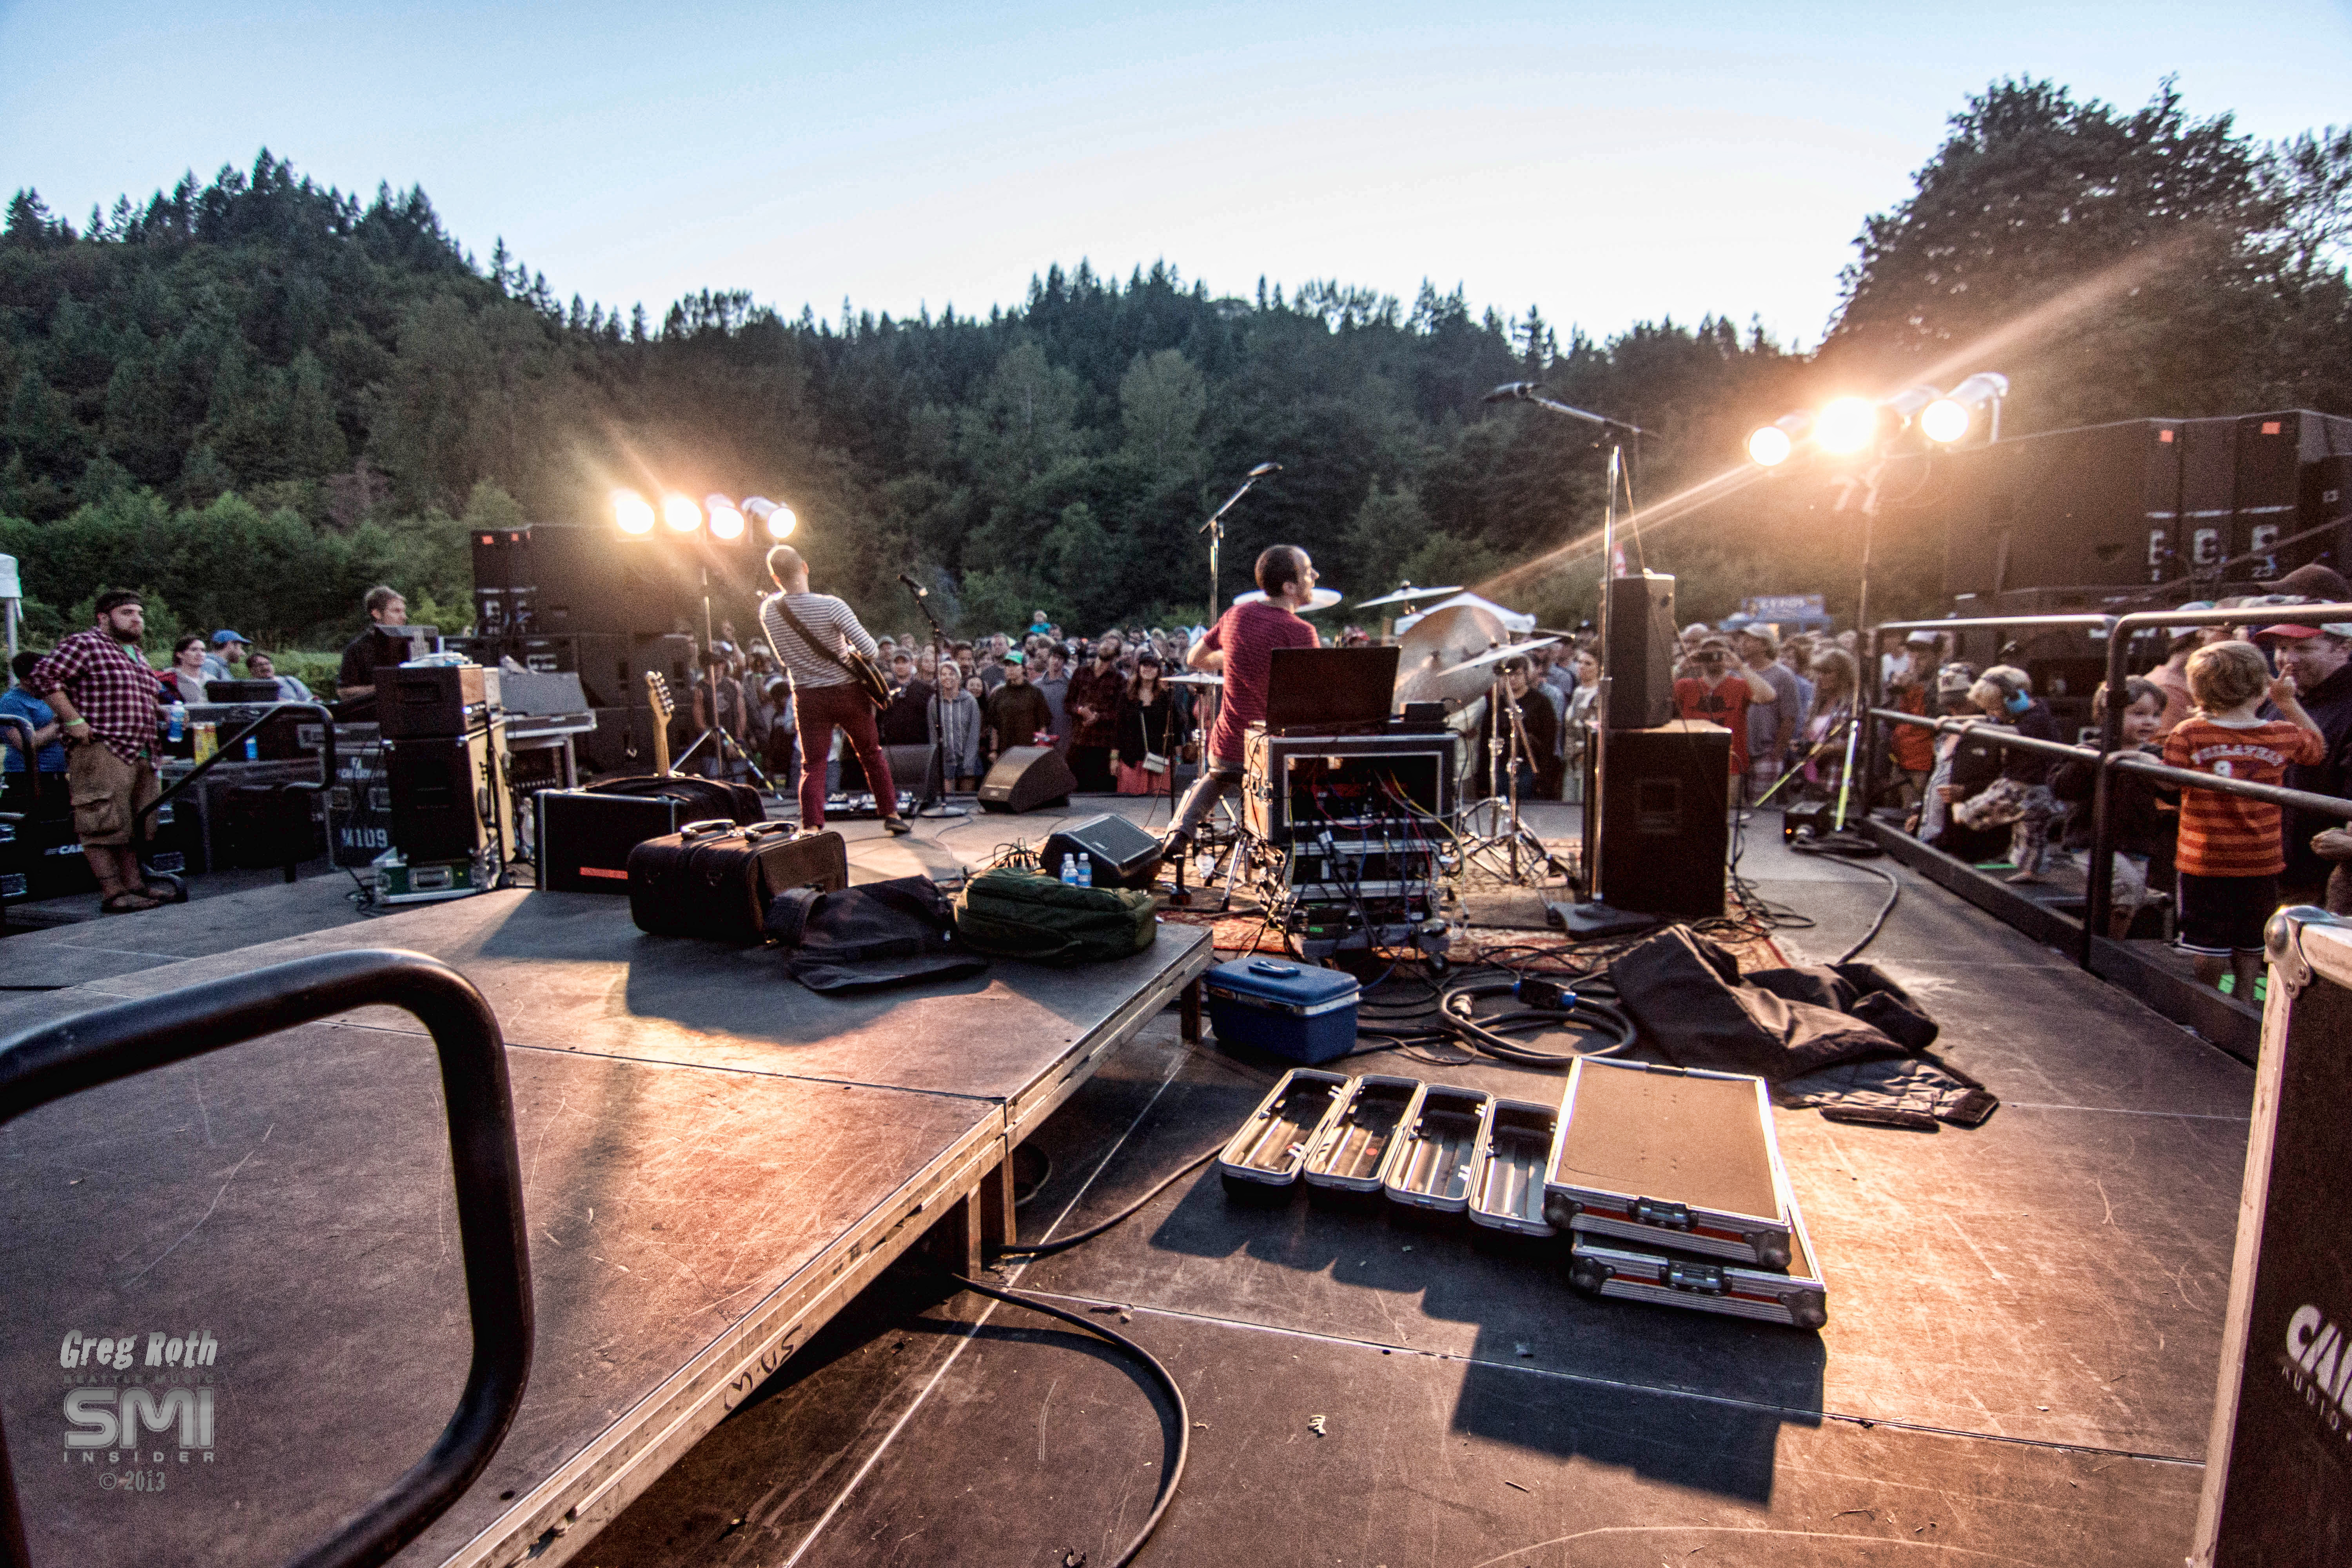 Timber! Outdoor Music Festival (Photo by Greg Roth)